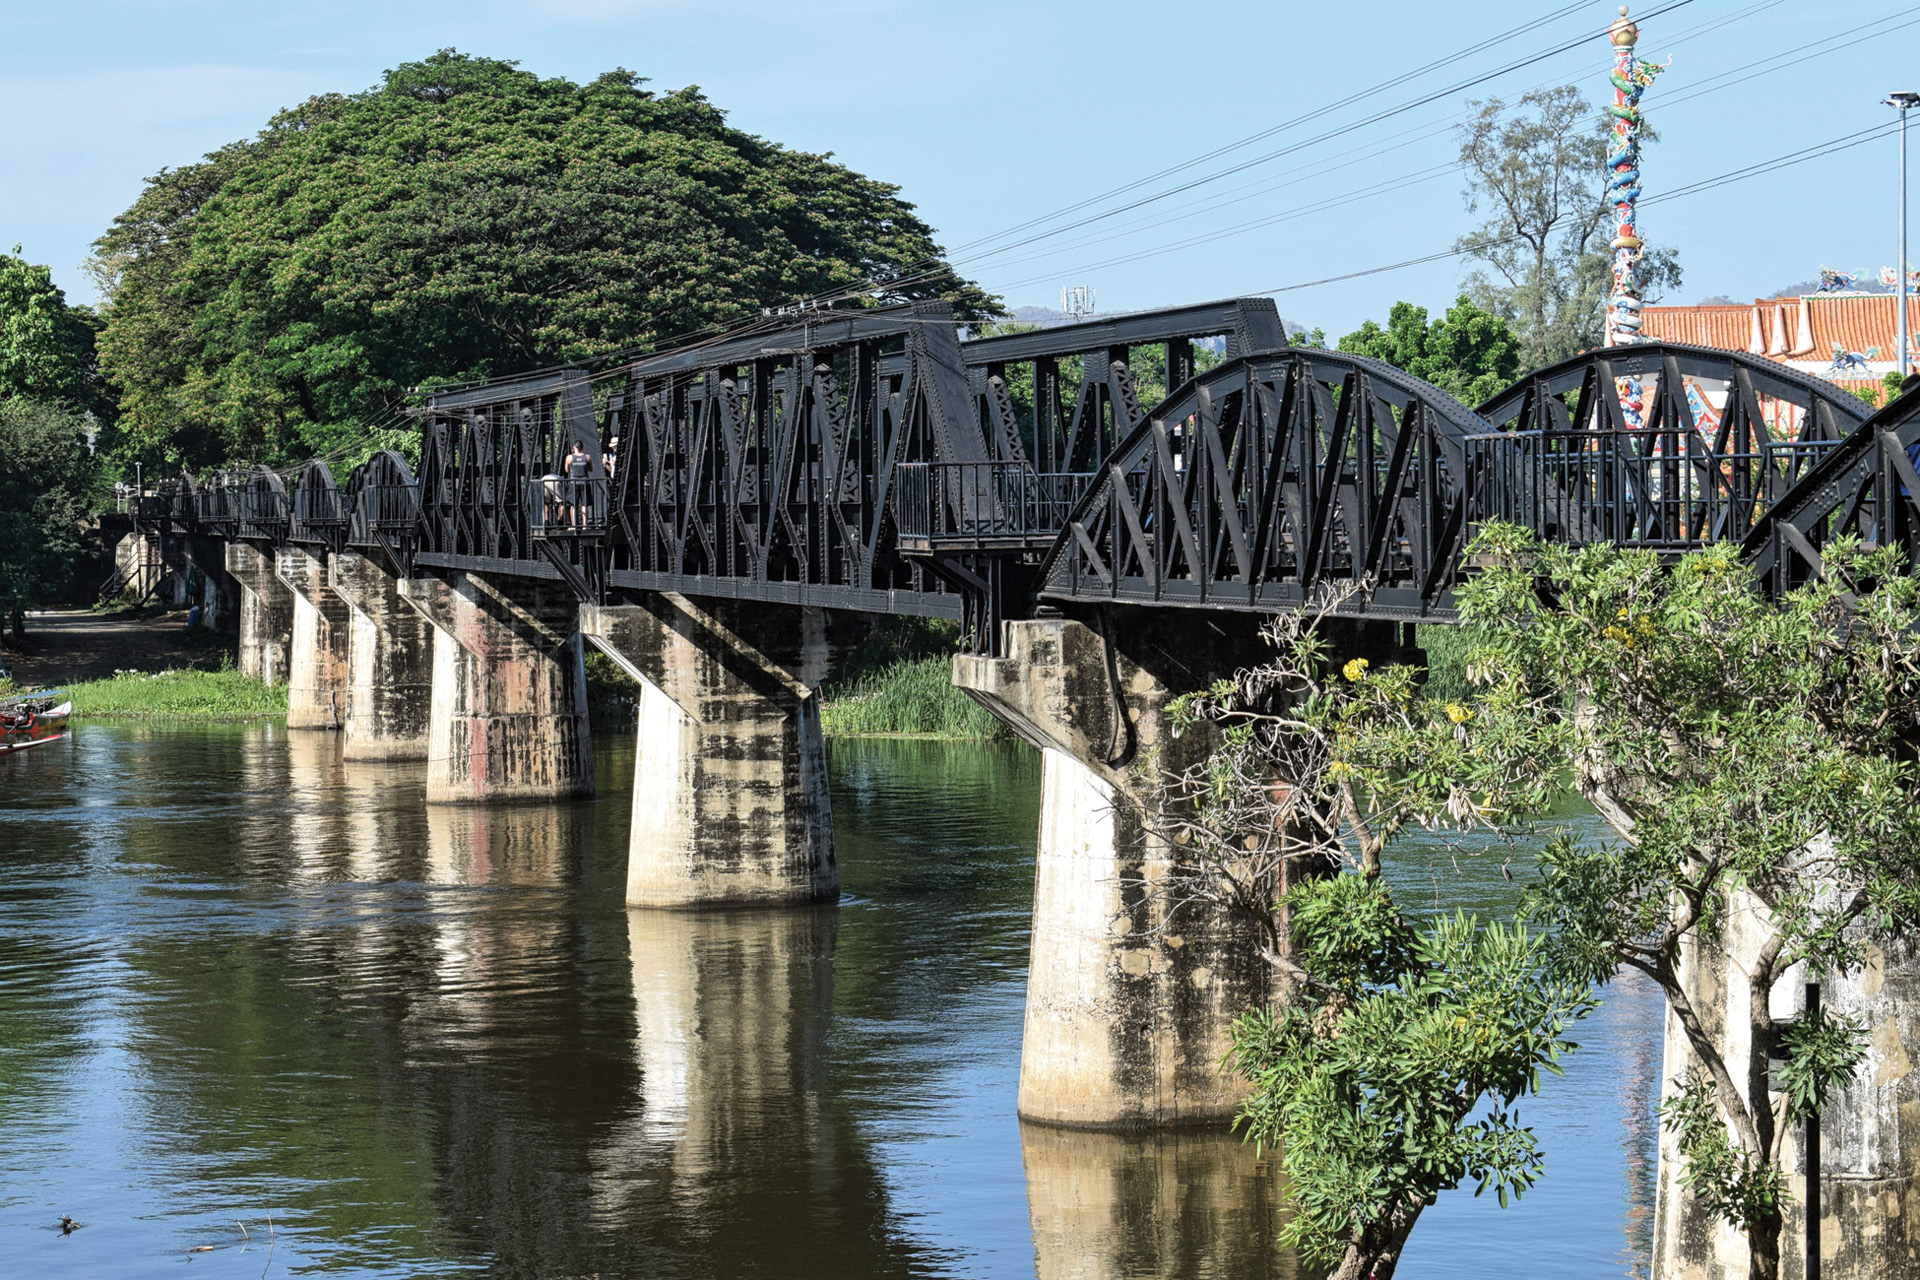 The largely intact Kwai Bridge as it appears today. As there was no actual “River Kwai,” this stretch of the Mae Klong River was renamed Kwae Yai, and is today a popular tourist destination.